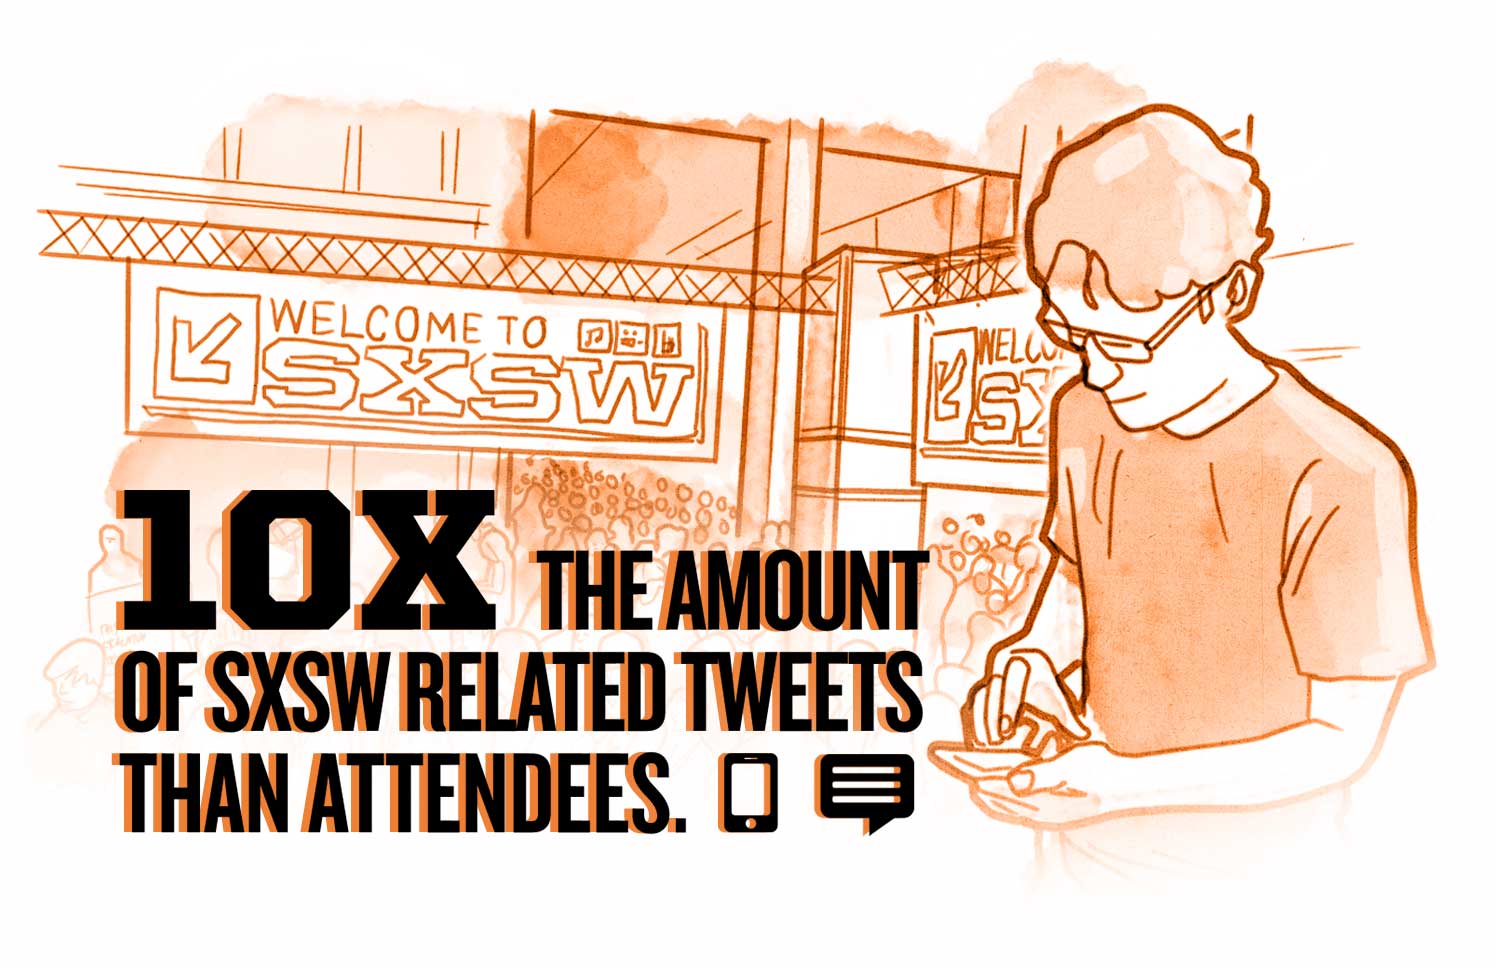 Illustrated graphic of a man using a smartphone overlaid by text: 10x the amount of SXSW related tweets than attendees.